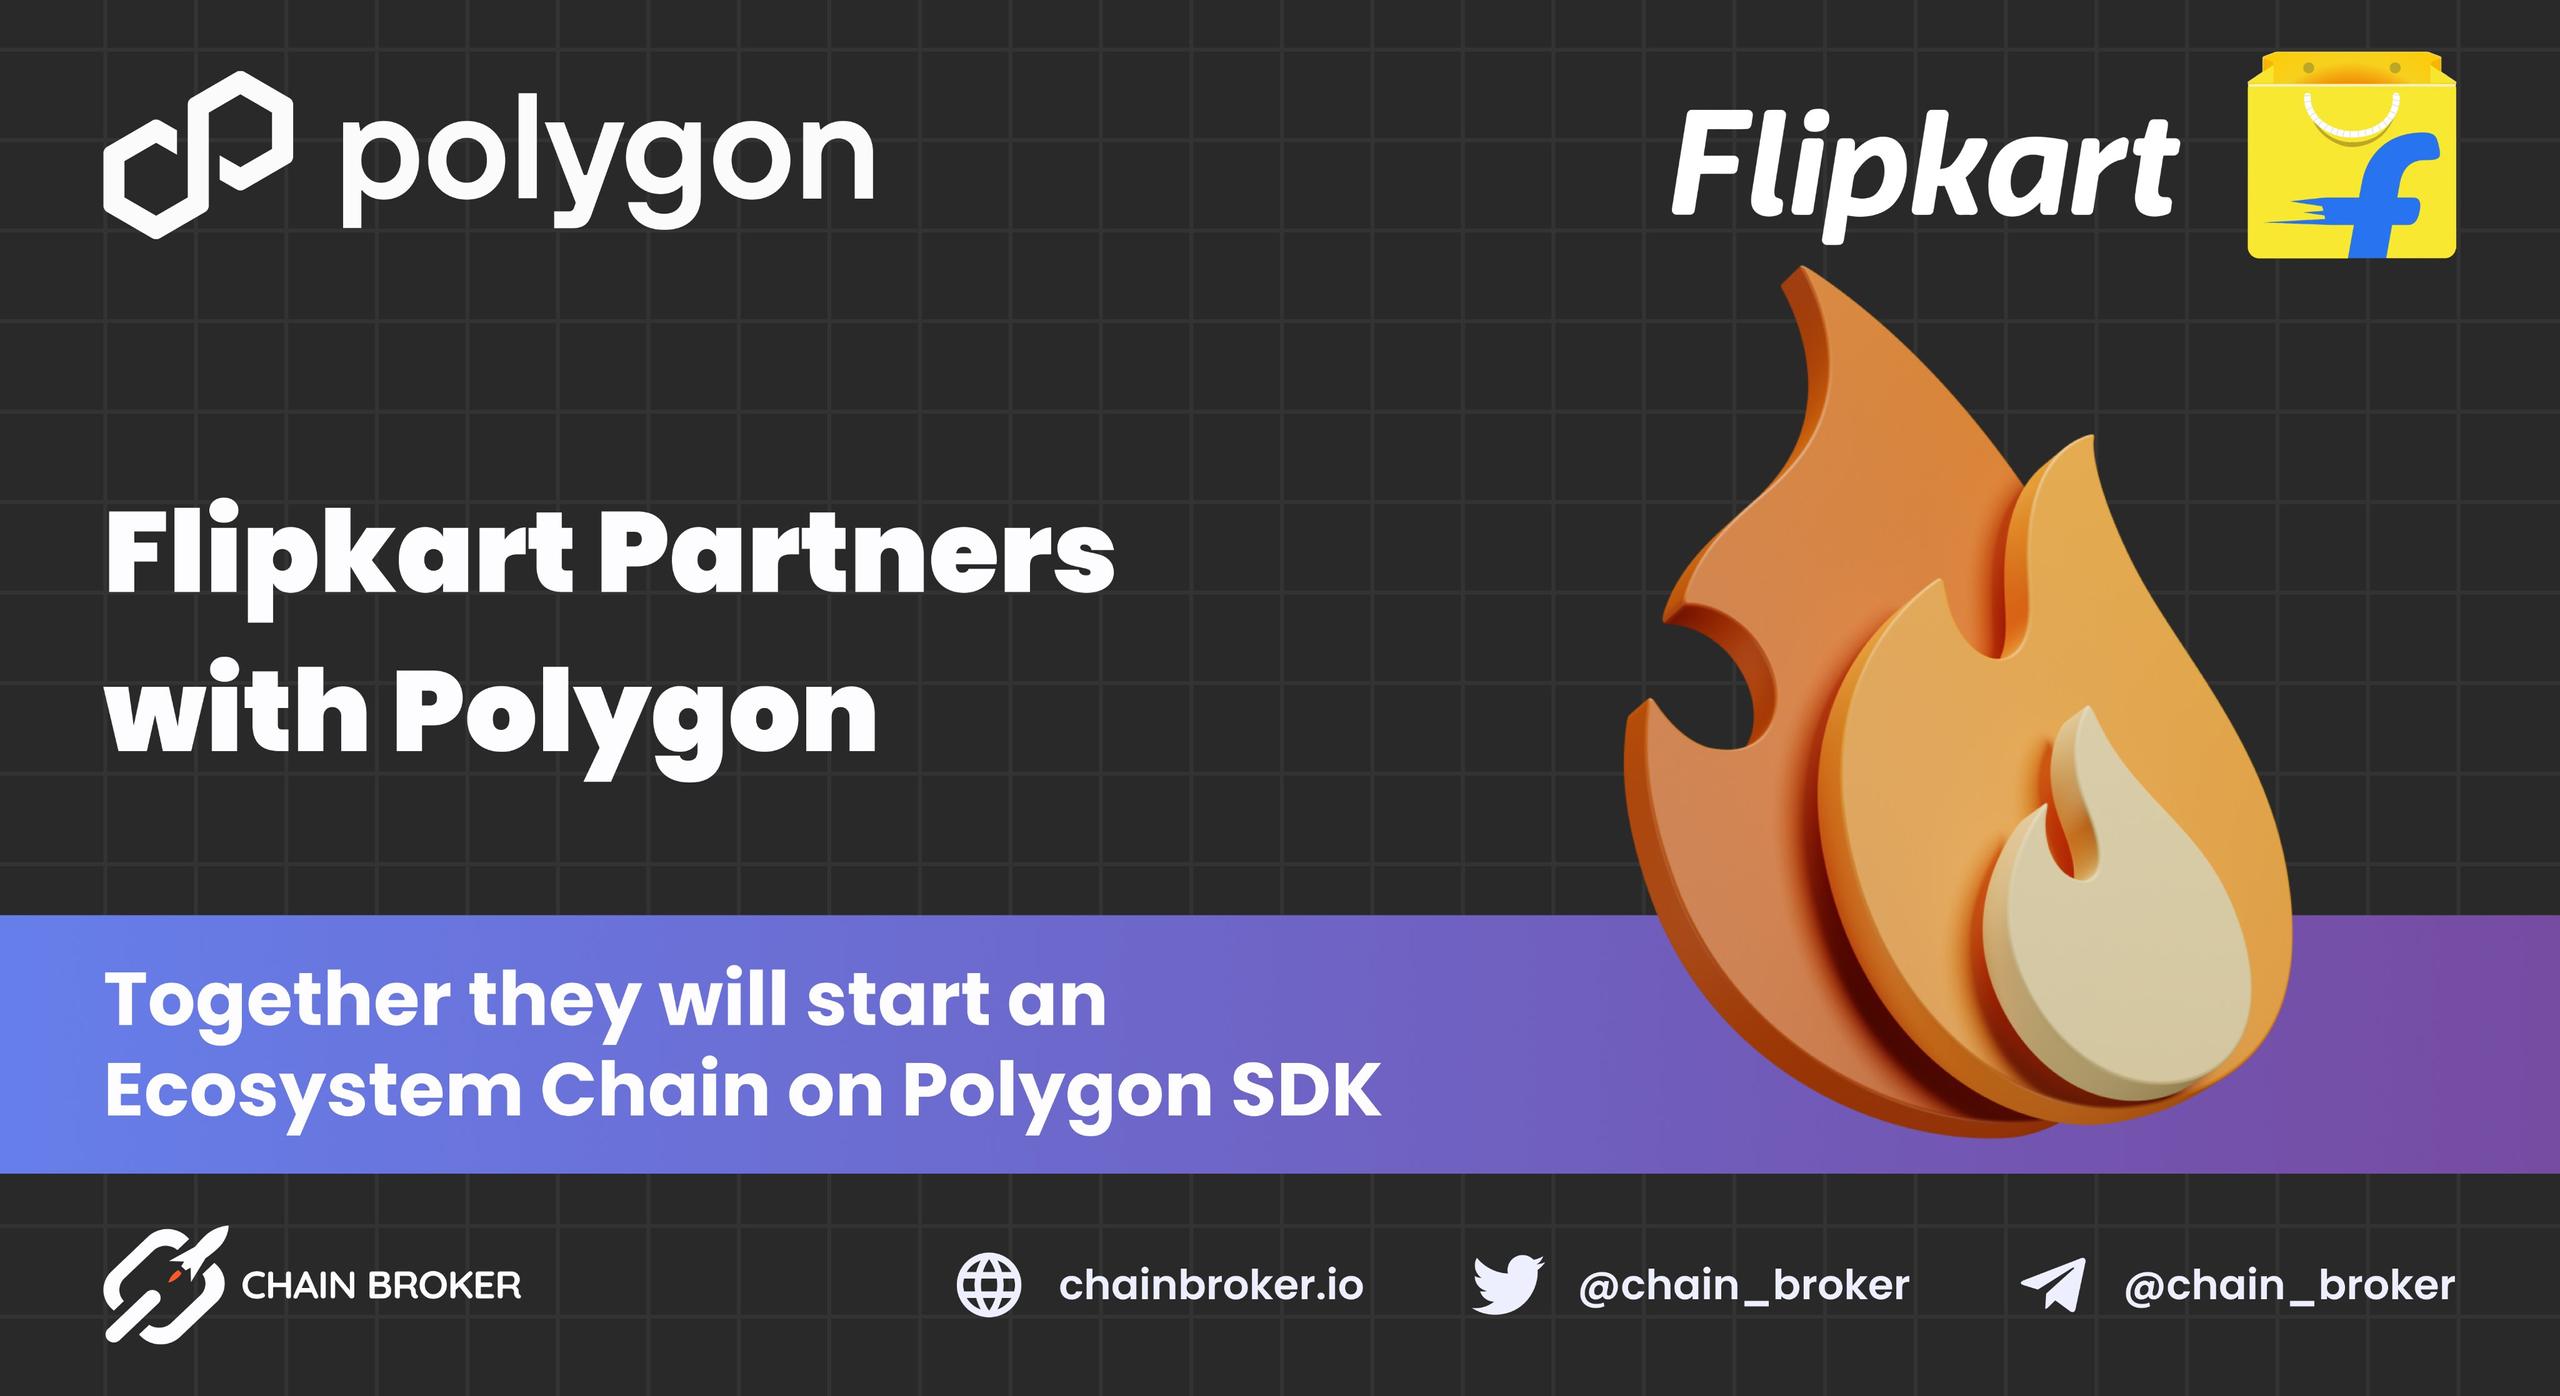 Indian Payment Giant launches an Ecosystem Chain with Polygon